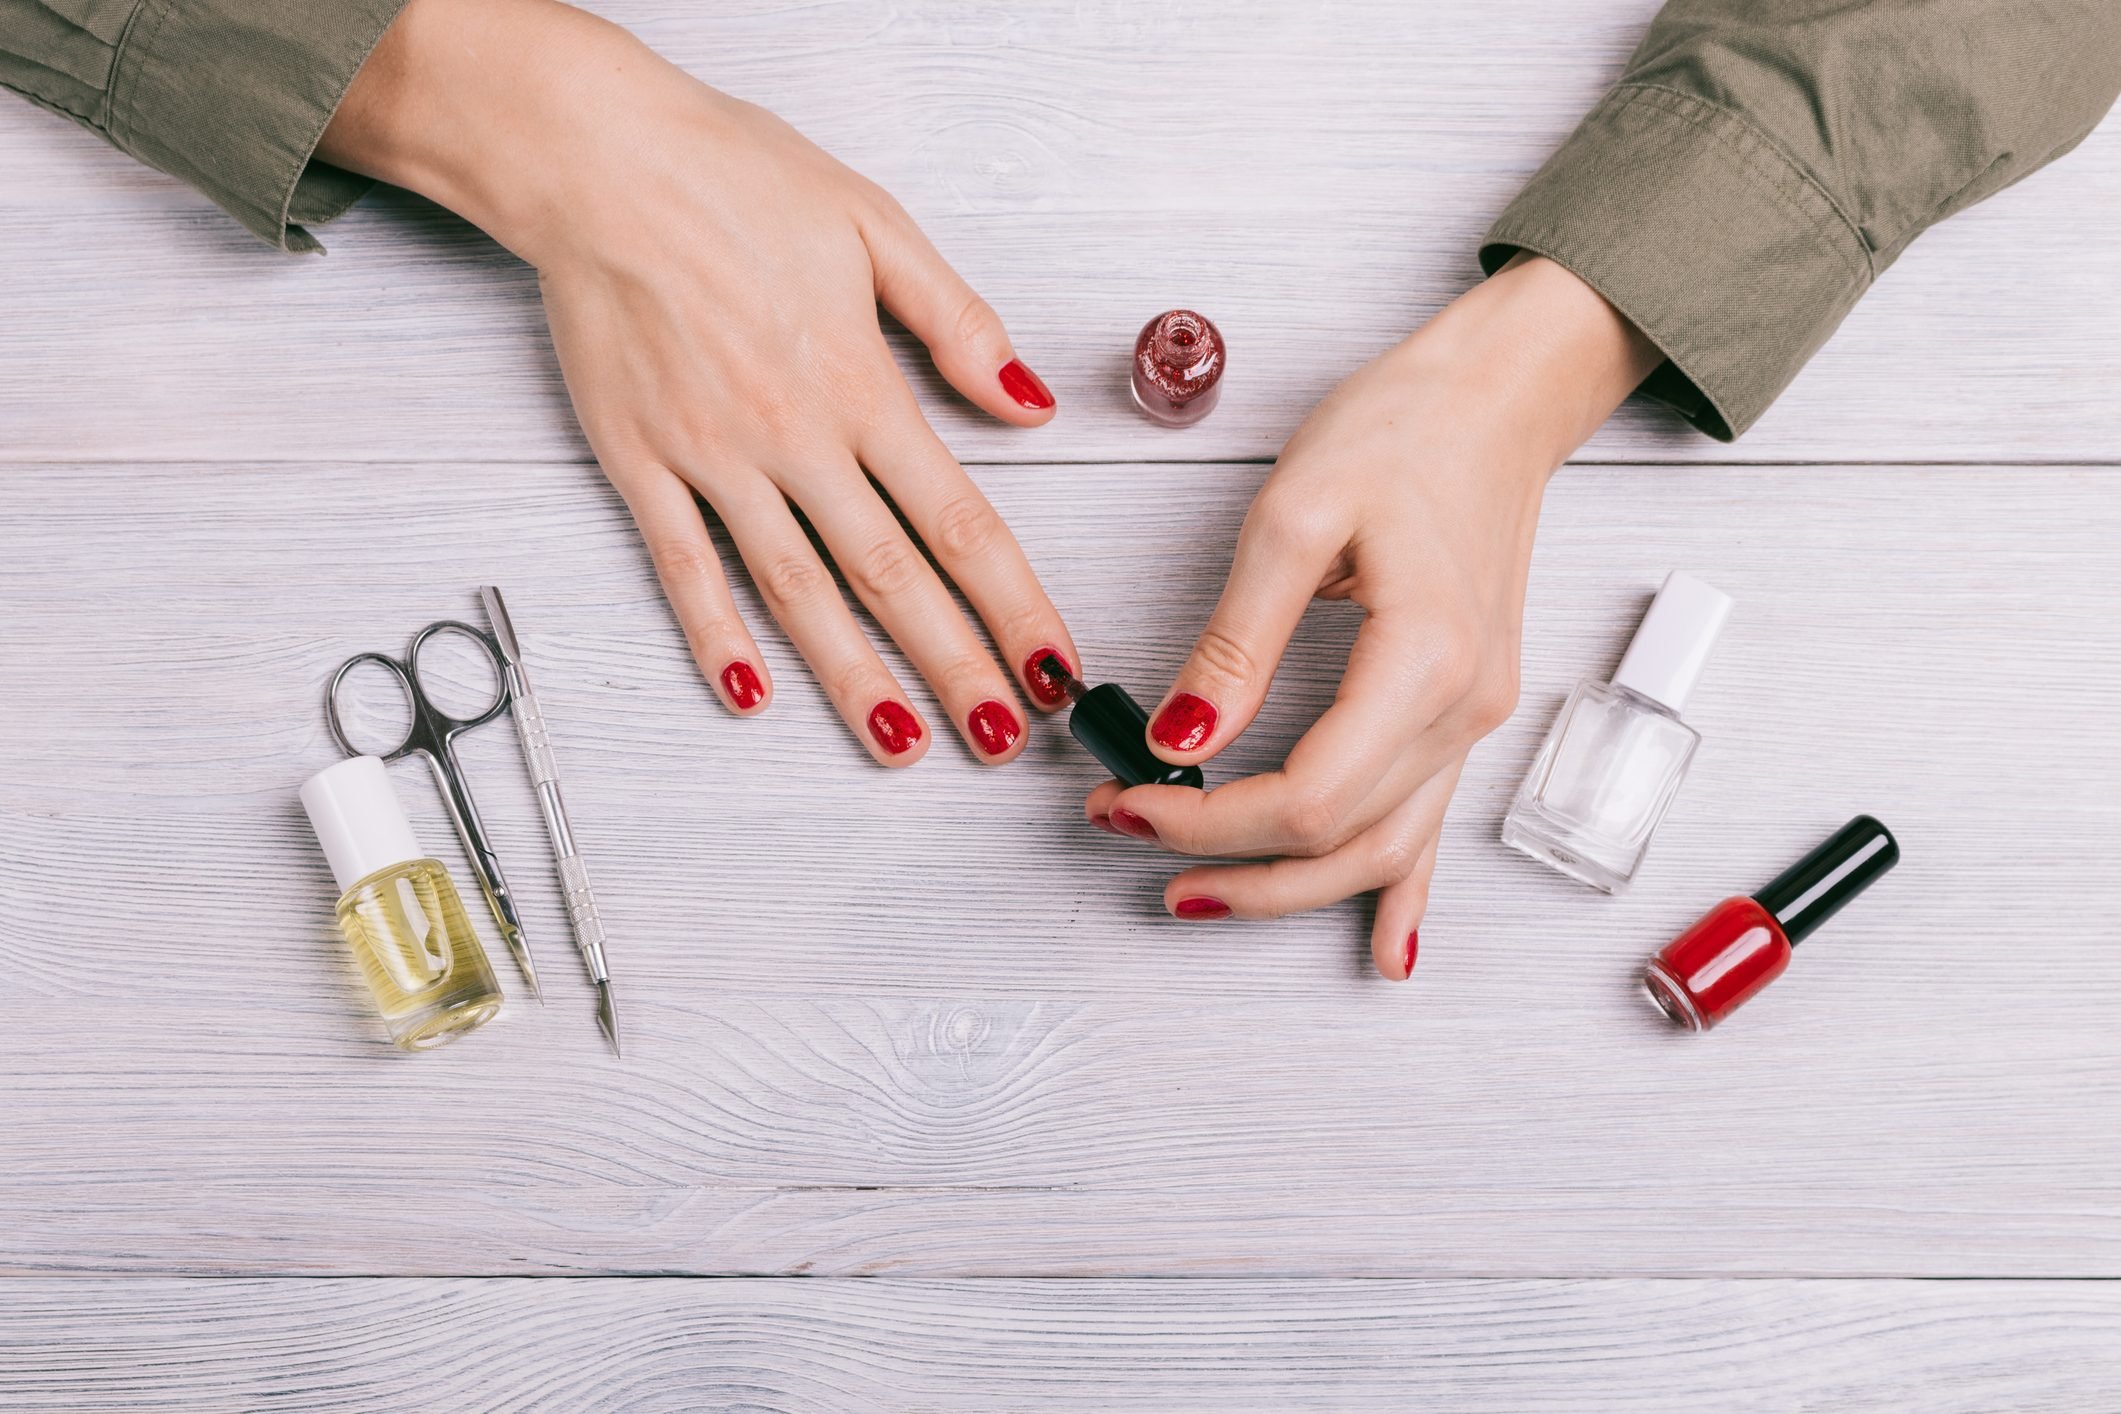 Tips for achieving the perfect at-home manicure